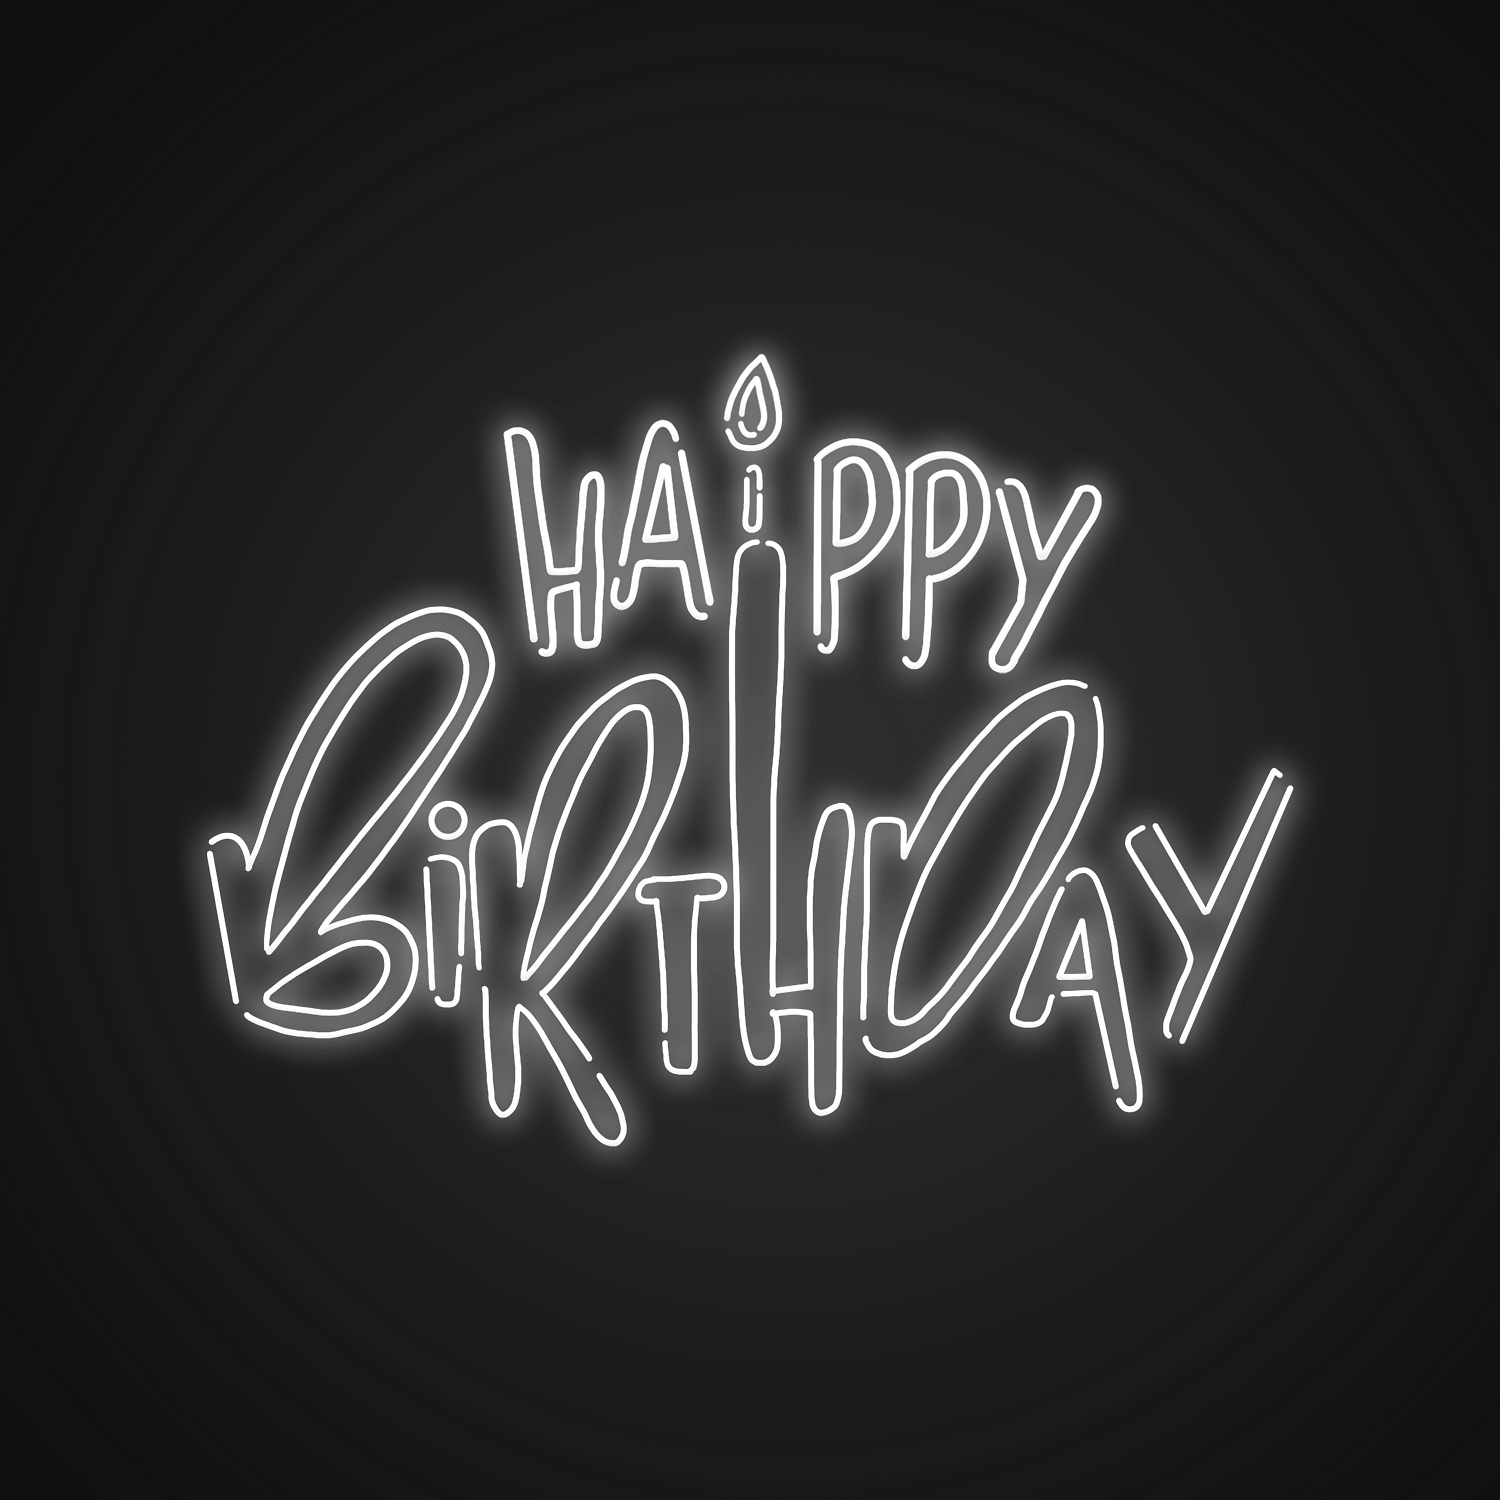 Happy Birthday Neon Light | Neon LED Sign | Made by Neonize